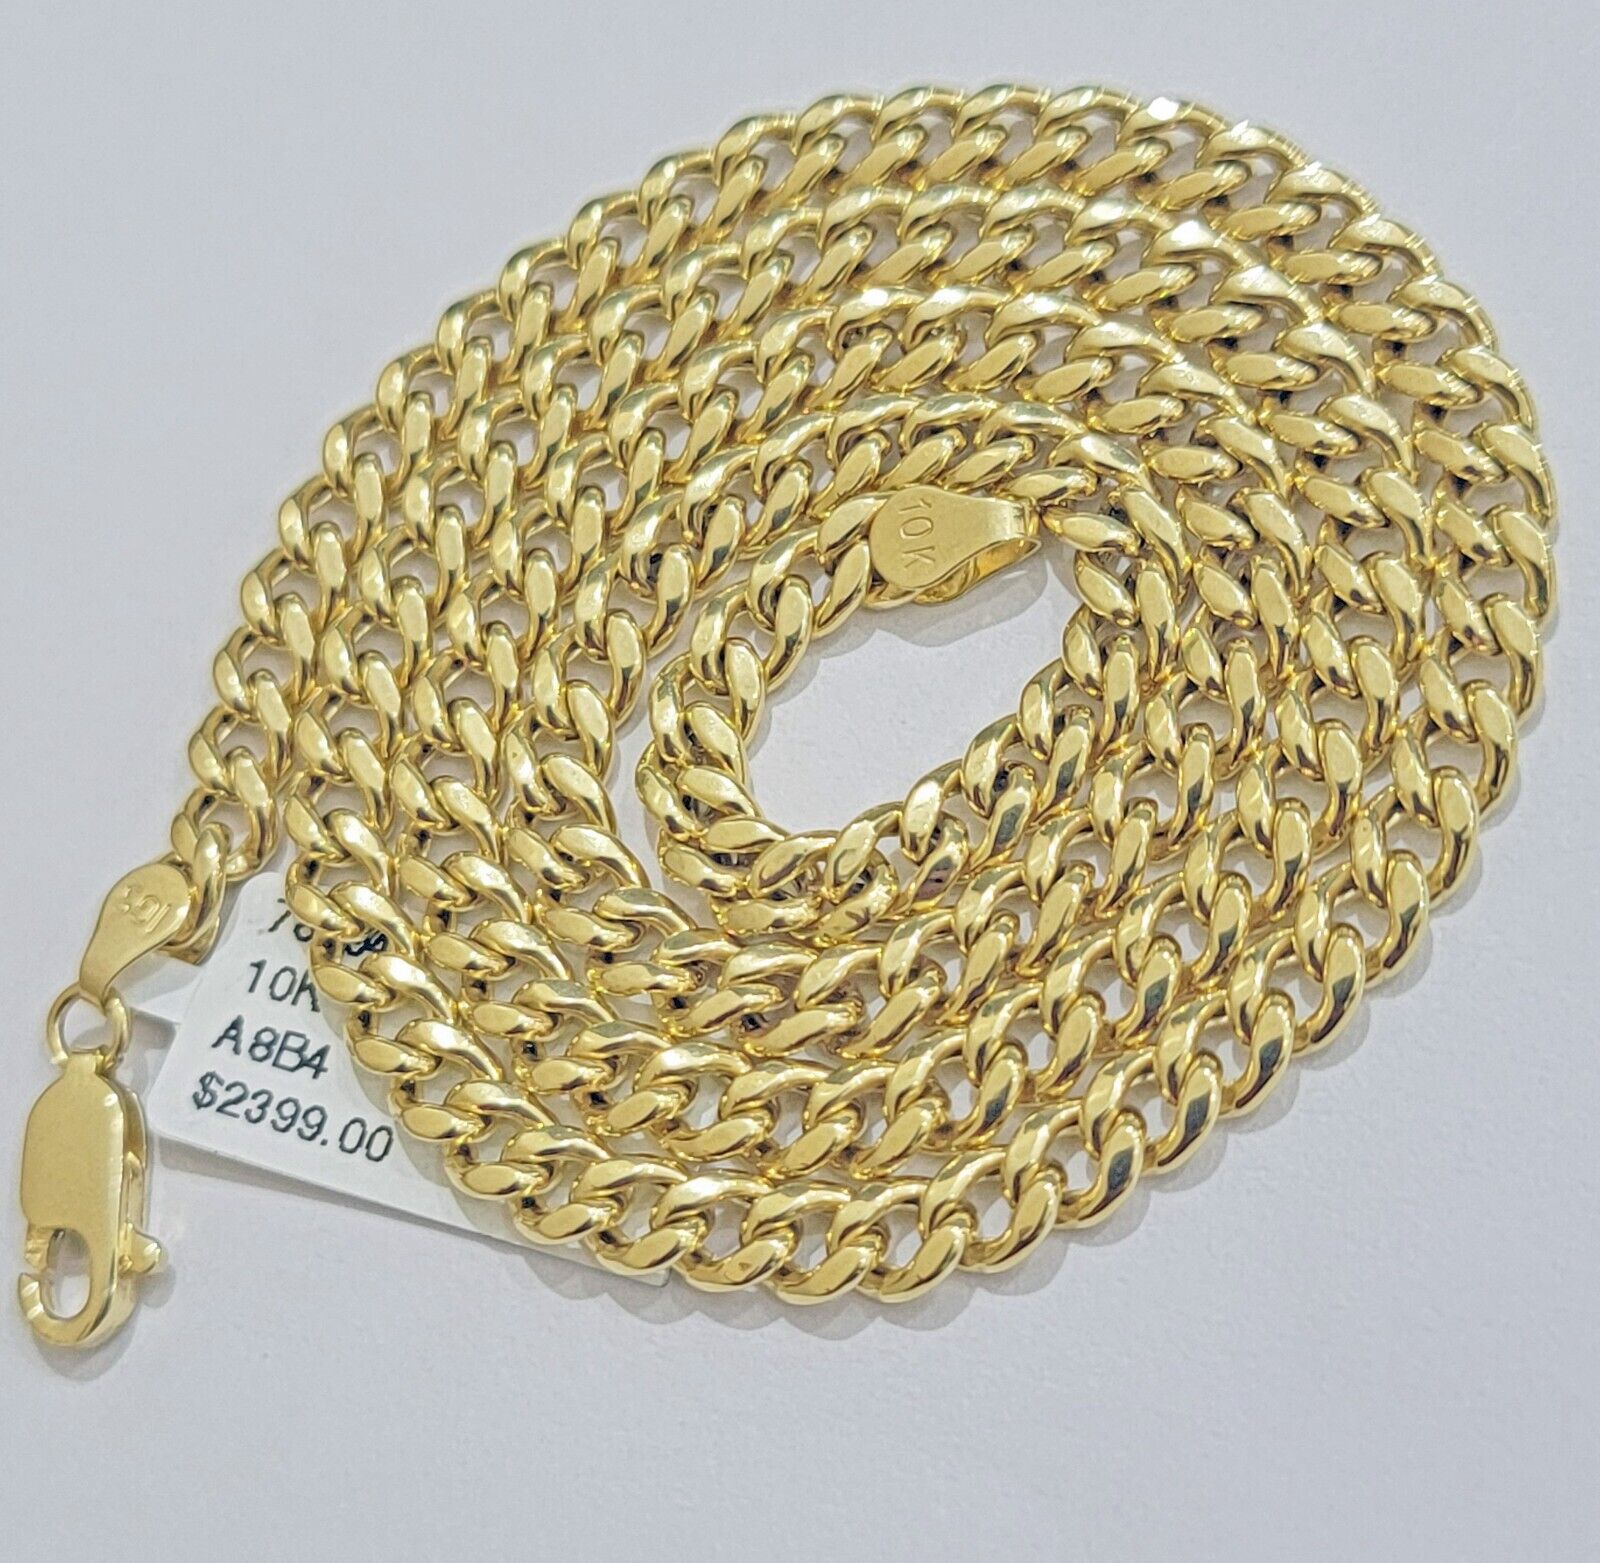 REAL 10k Yellow Gold Cuban link Chain Nugget Charm Pendant Necklace 5mm 24" Inch